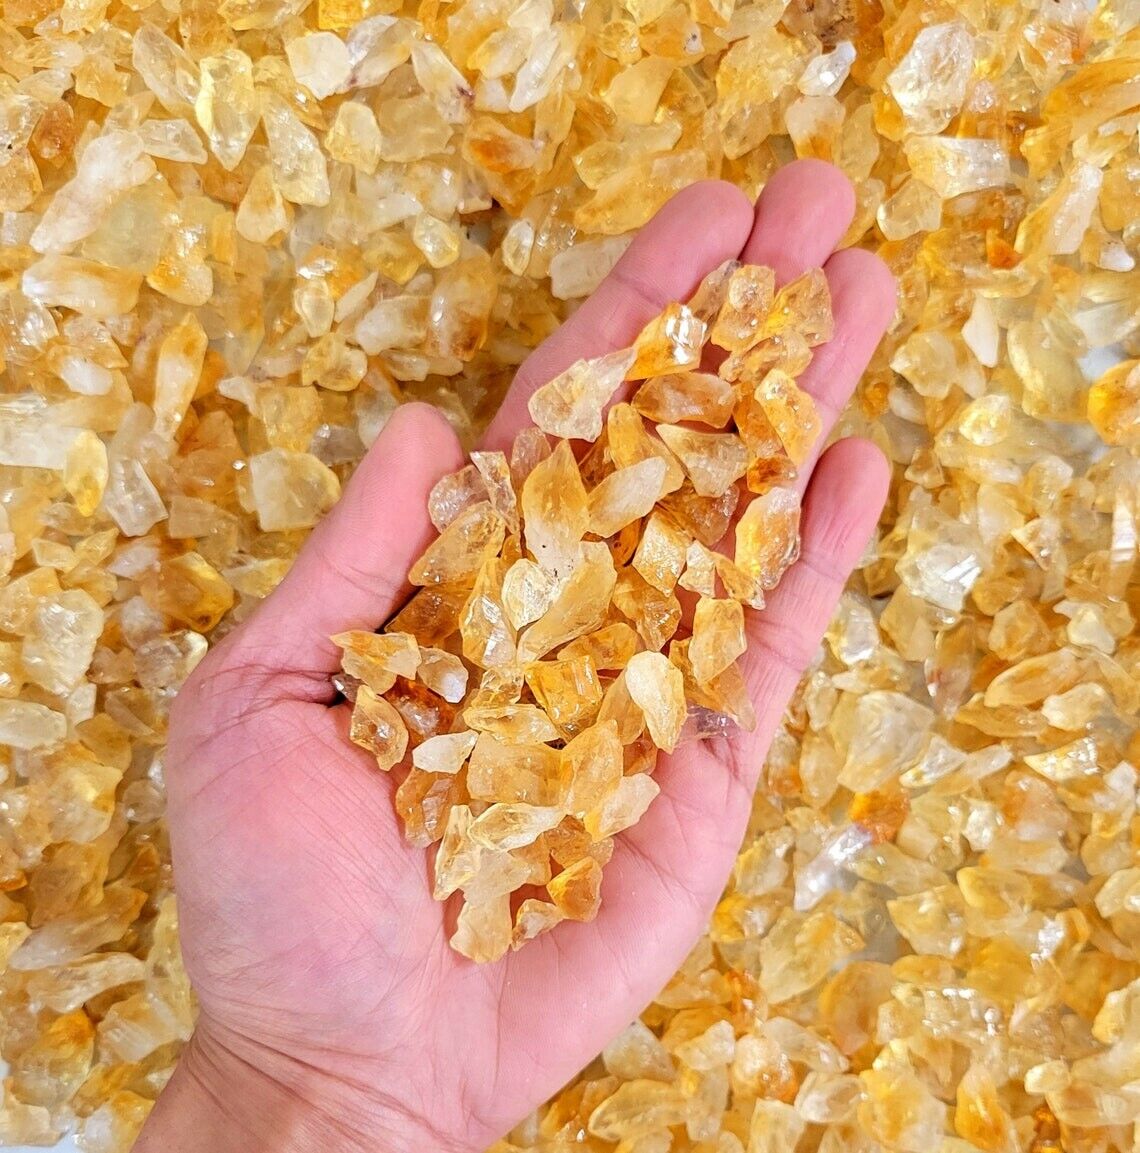 Crushed Citrine Crystal Chips Tiny Pieces Bulk Gemstones for Crafting Jewelry